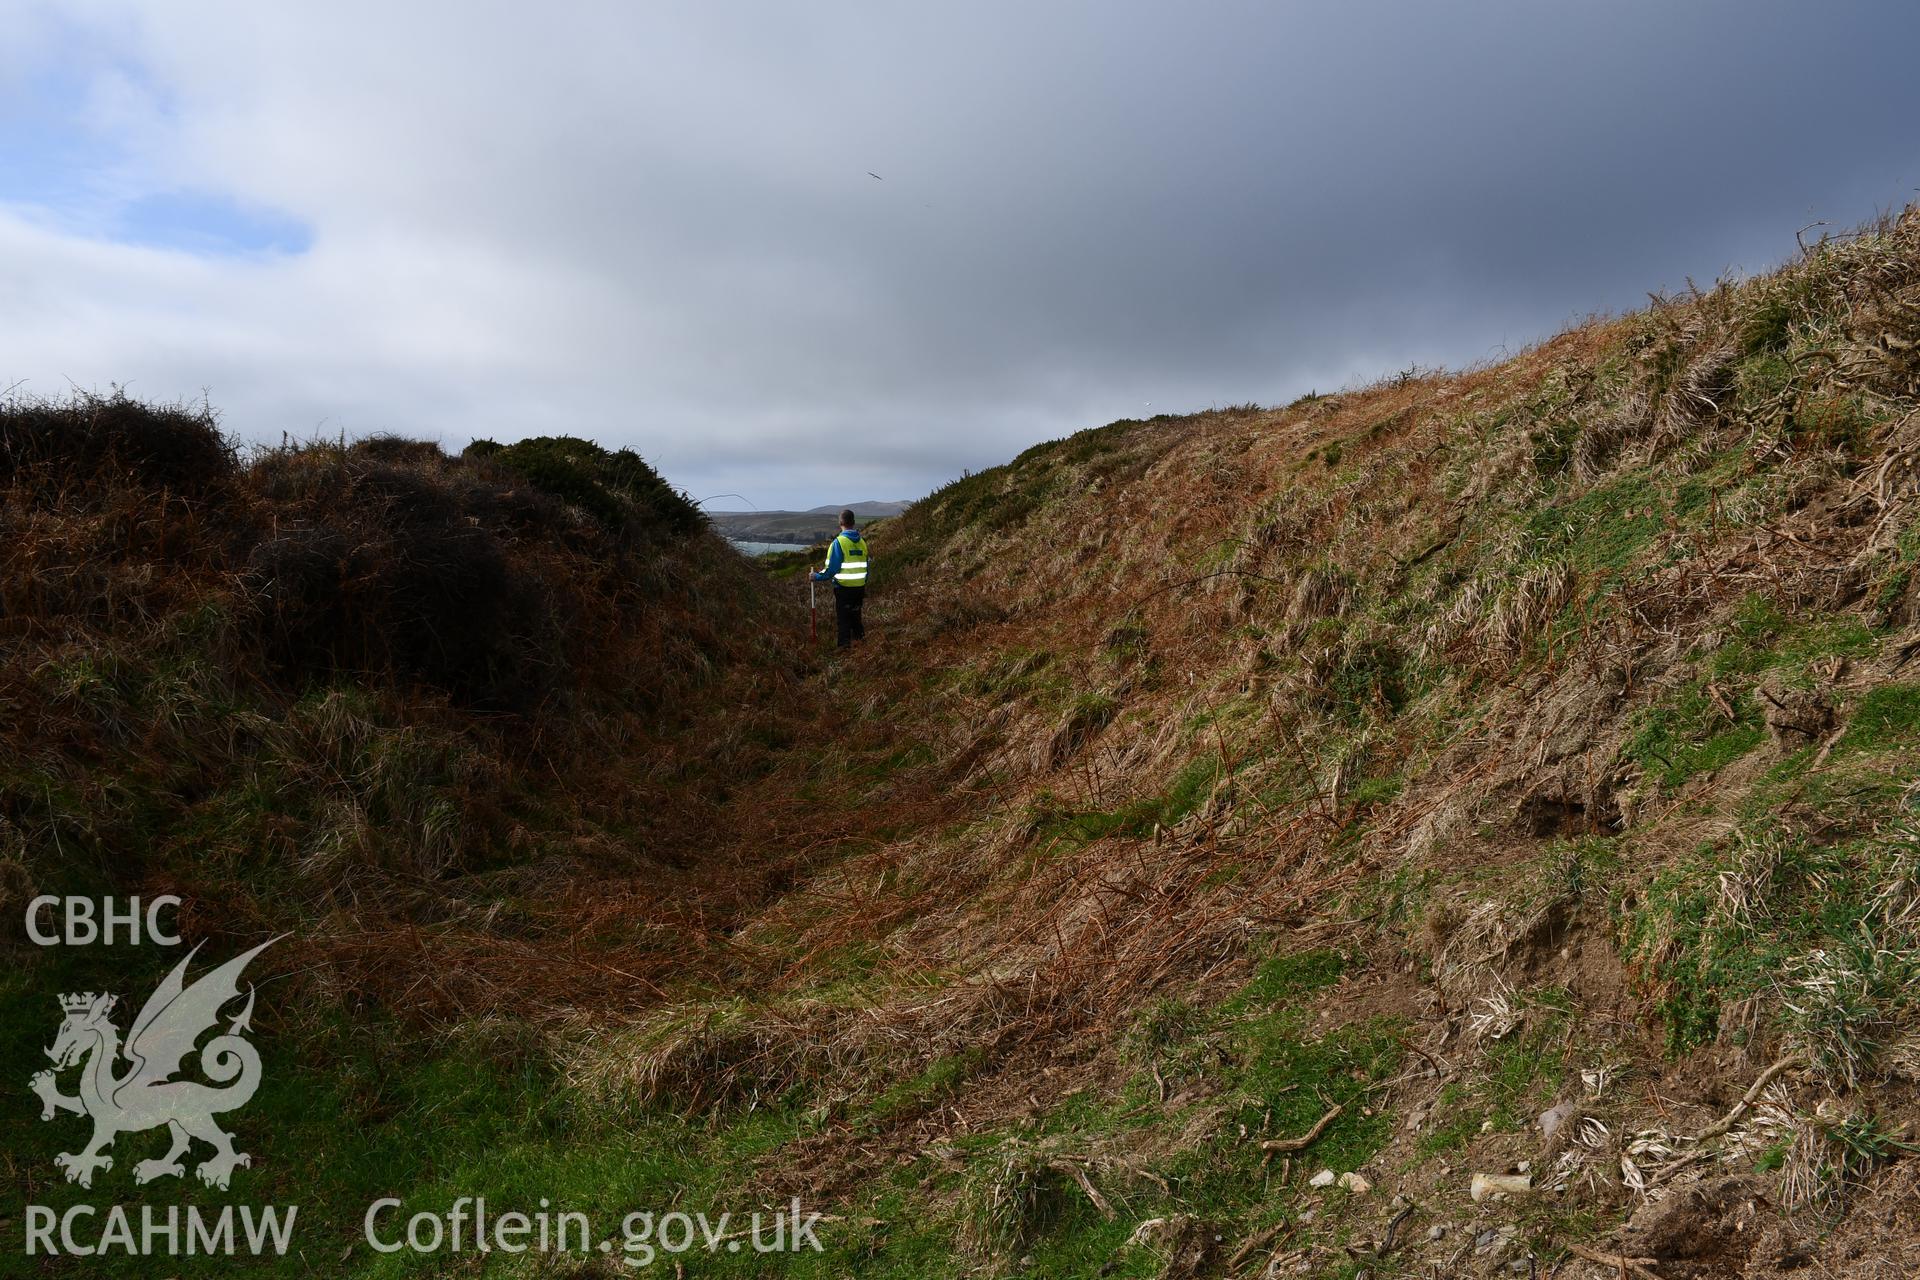 Ramparts and ditch. Person and 1m scale. Camera facing W. Taken by Hannah Genders Boyd. Produced with EU funds through the Ireland Wales Co-operation Programme 2014-2023. All material made freely available through the Open Government Licence.